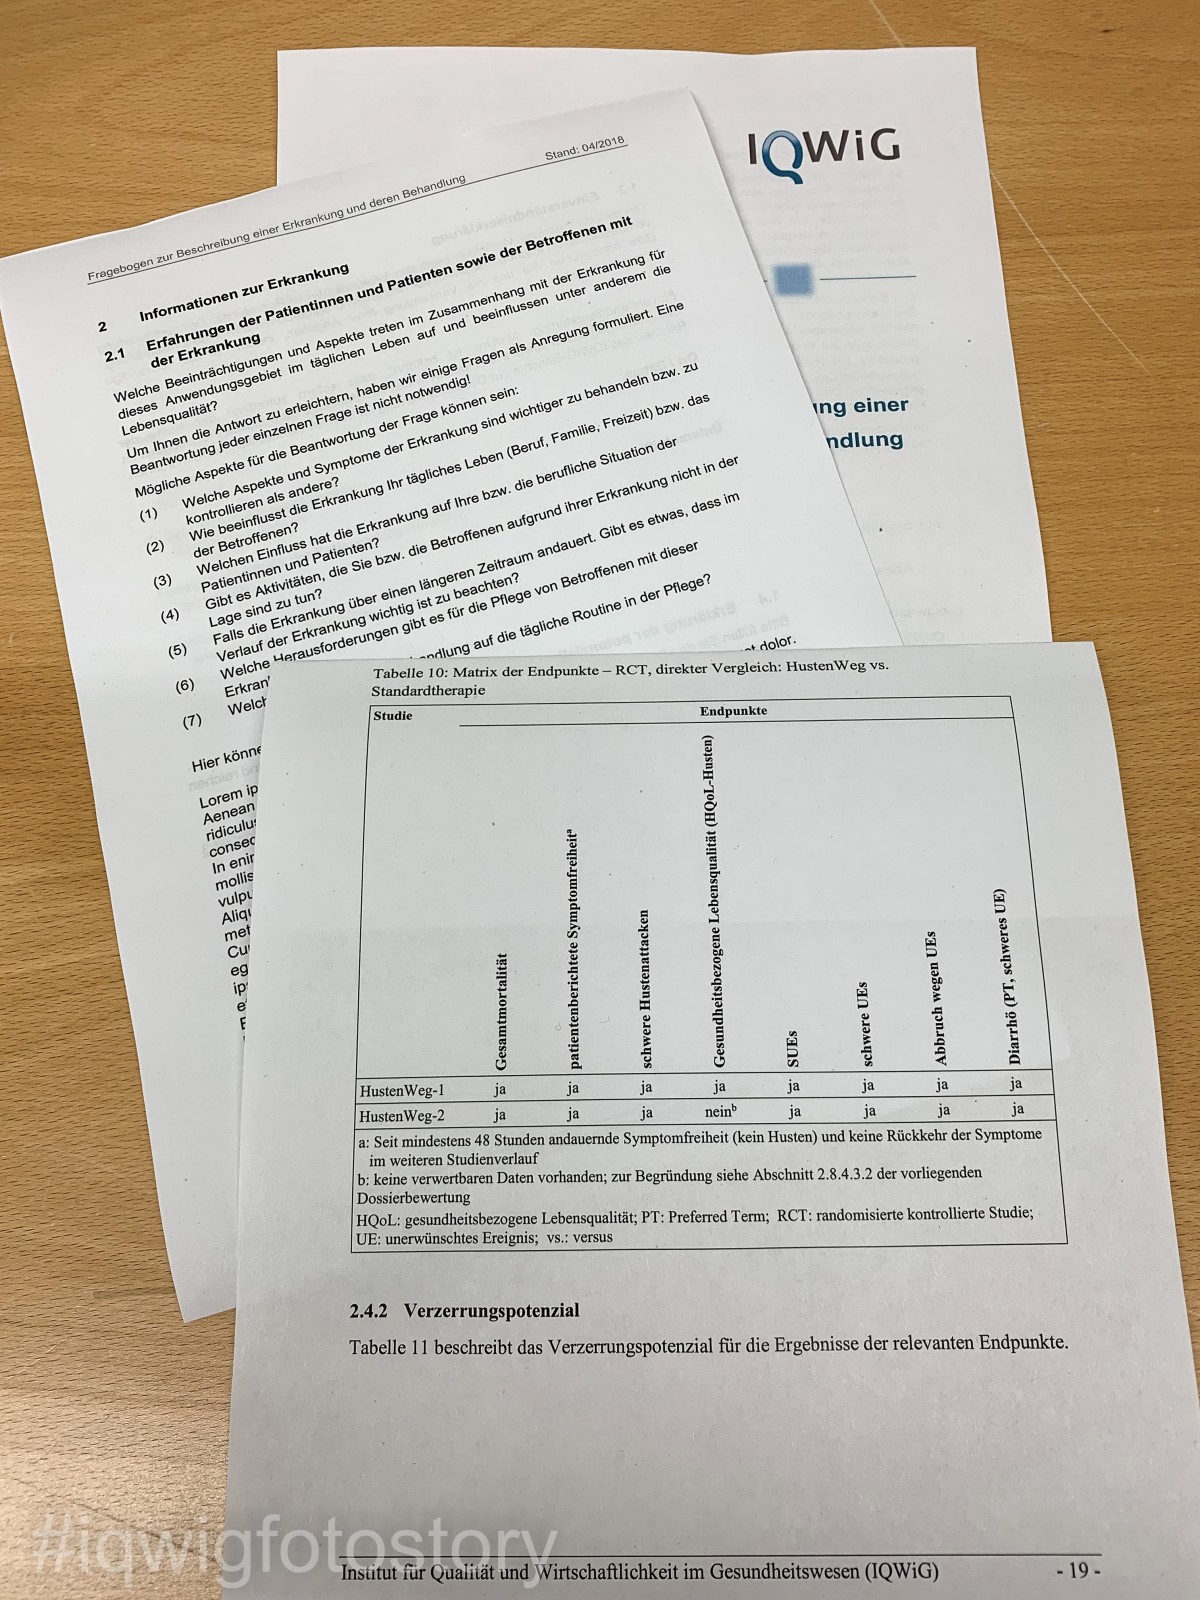 Two sheets from a completed patient questionnaire and a table of endpoints from the draft of the dossier assessment are displayed on a desk.